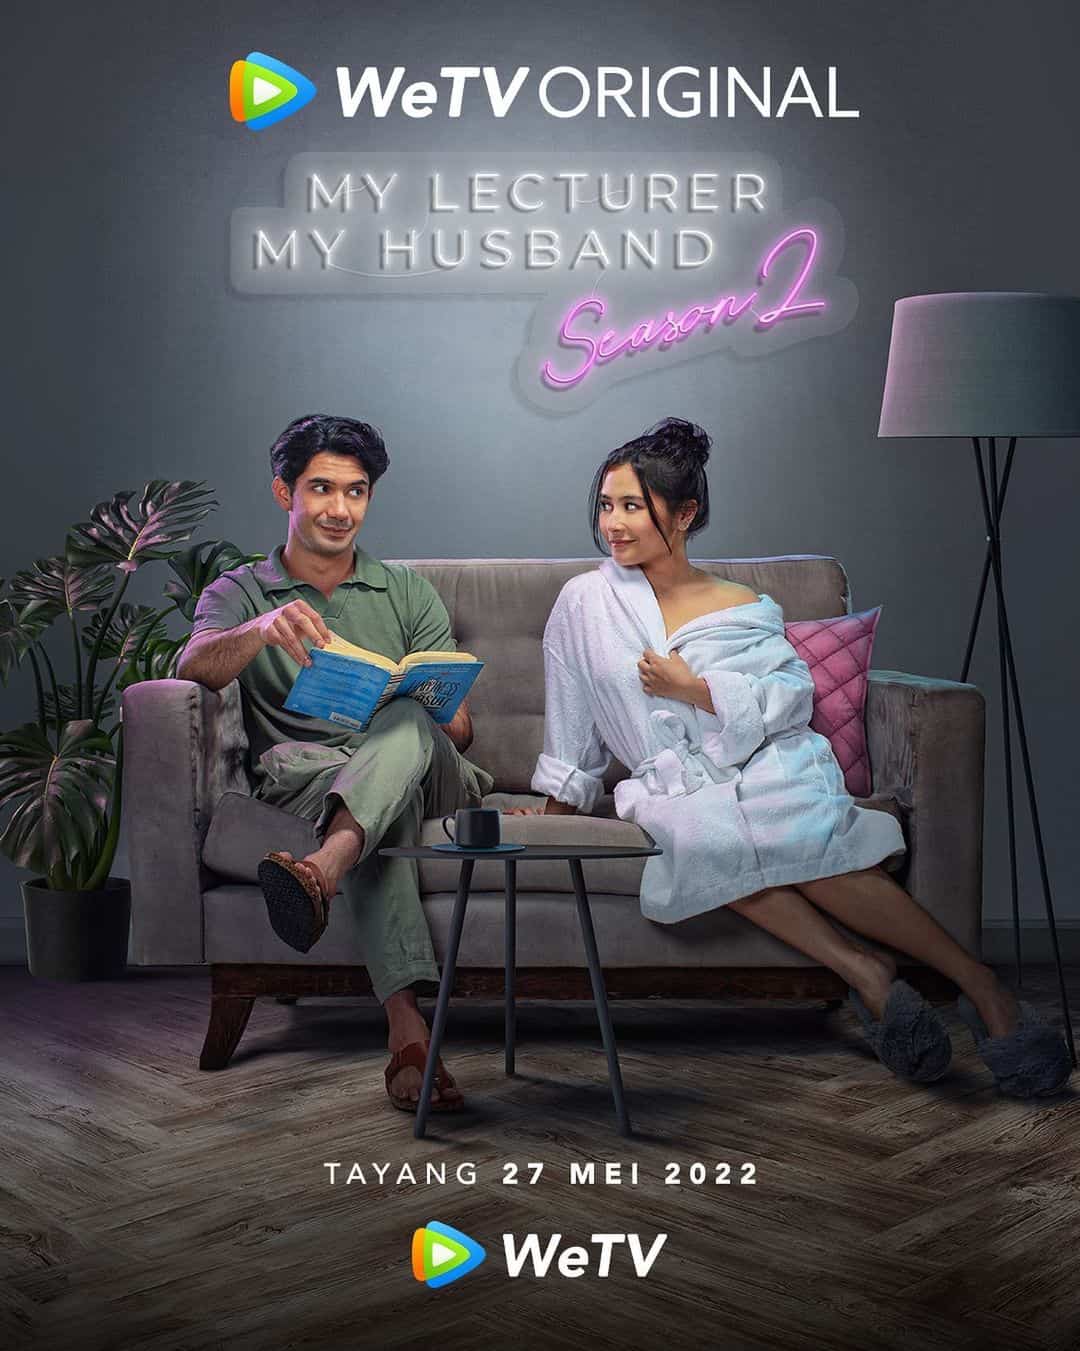 My Lecturer My Husband Season 2 - Sinopsis, Pemain, OST, Episode, Review